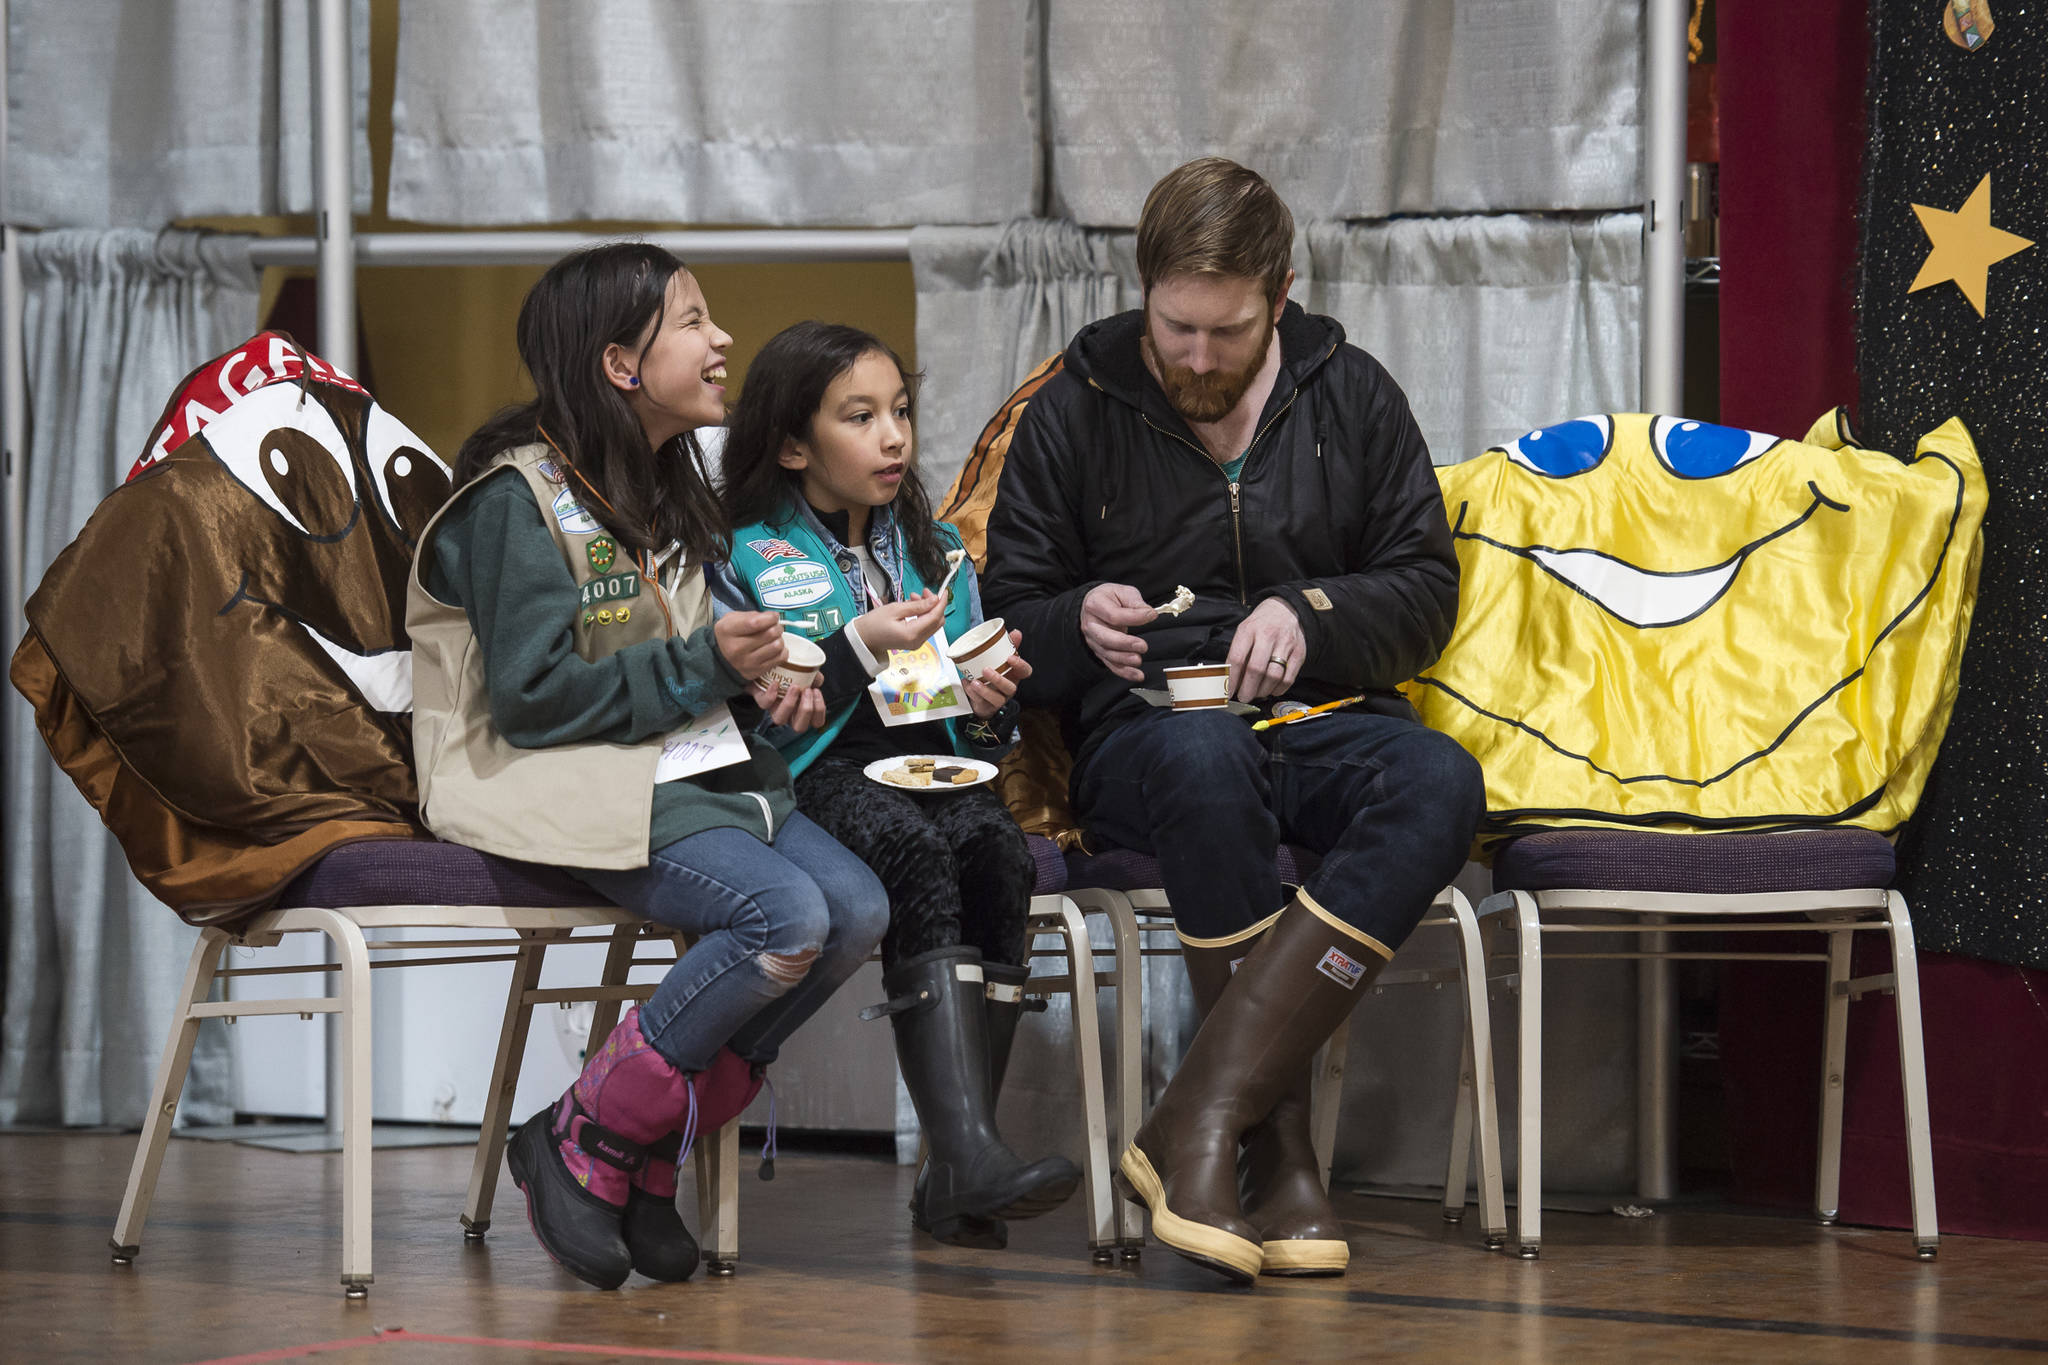 Jordan Kendall sits with his daughter, Neeka, 10, center, and Isabel Danner, 11, as they taste cookies and Coppa ice cream made with Girl Scout cookies during a Cookie Rally at the Juneau Arts & Culture Center on Friday, Jan. 11, 2019. The rally kicks off the first day of selling cookies for the Girl Scouts. (Michael Penn | Juneau Empire)